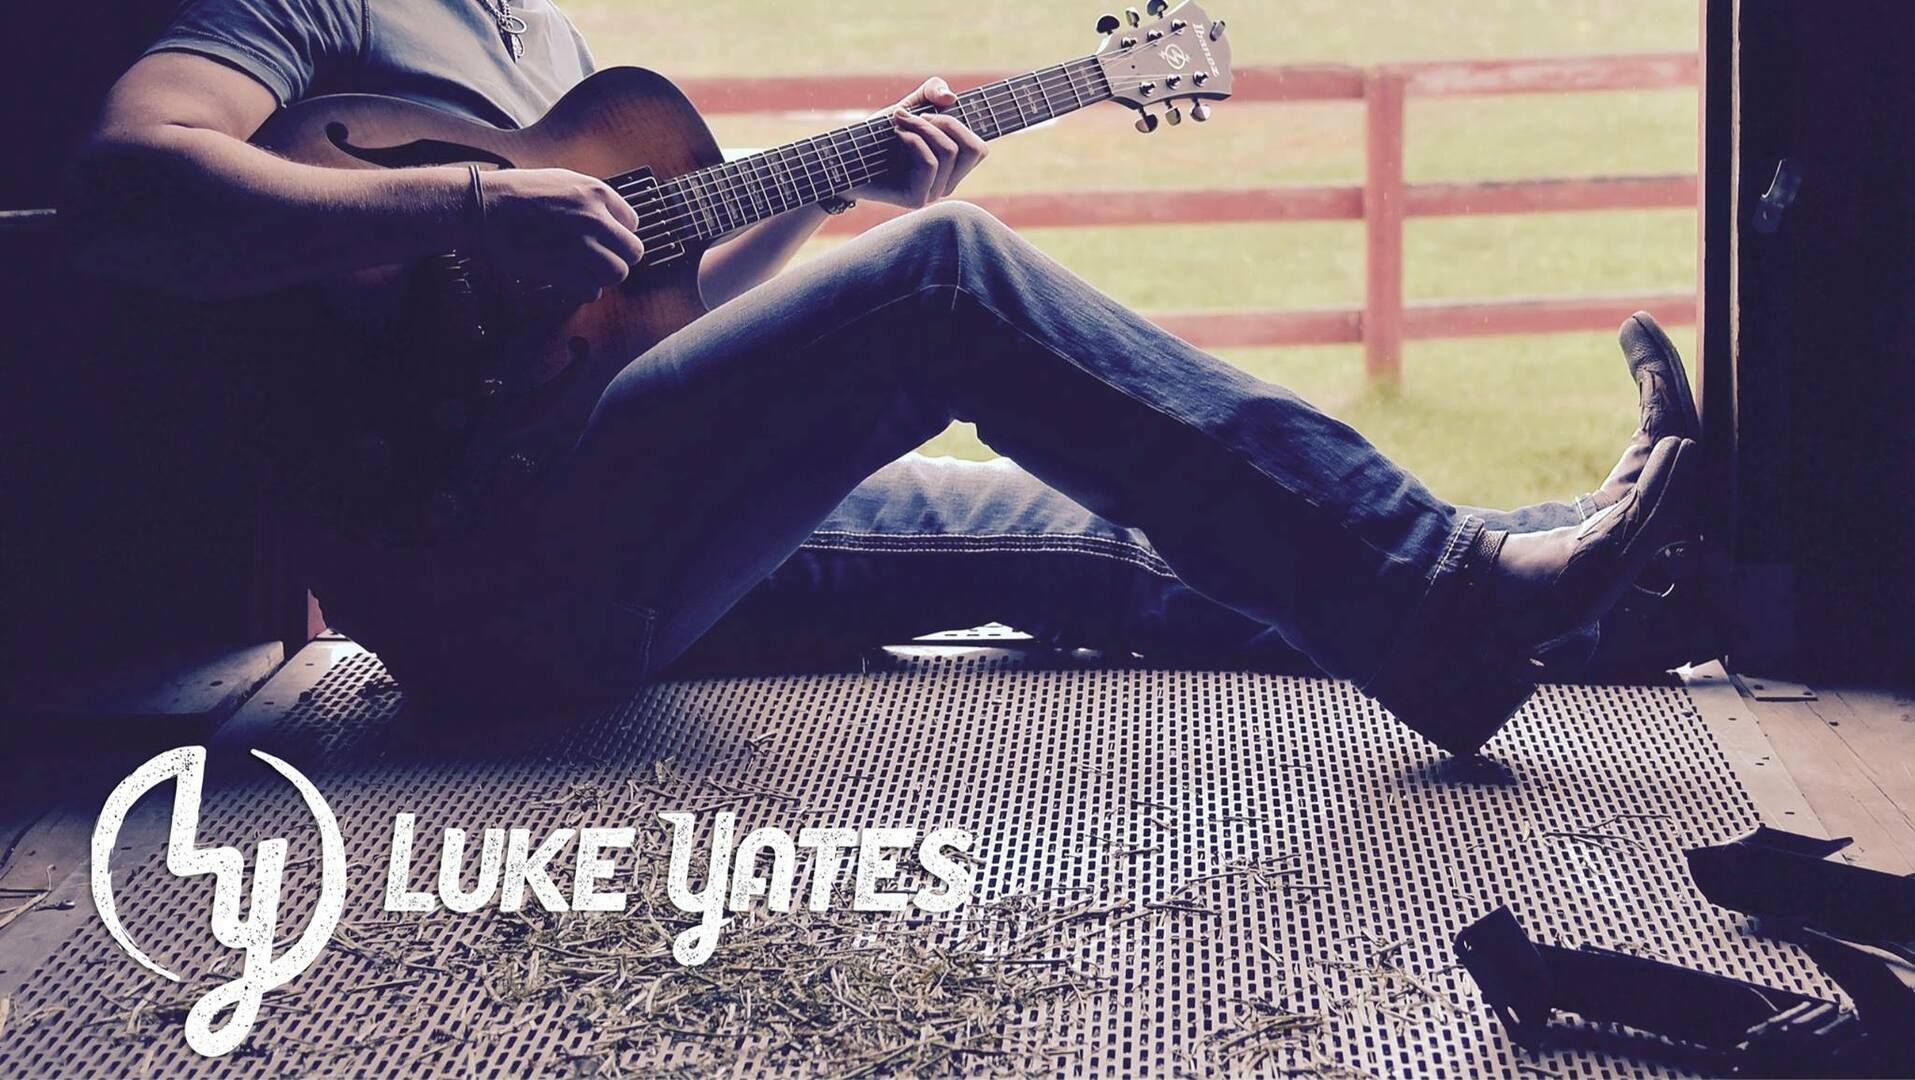 Popular Christian Country Artists, Luke Yates, in concert at Mountain View Church in Boise, Boise, Idaho, United States